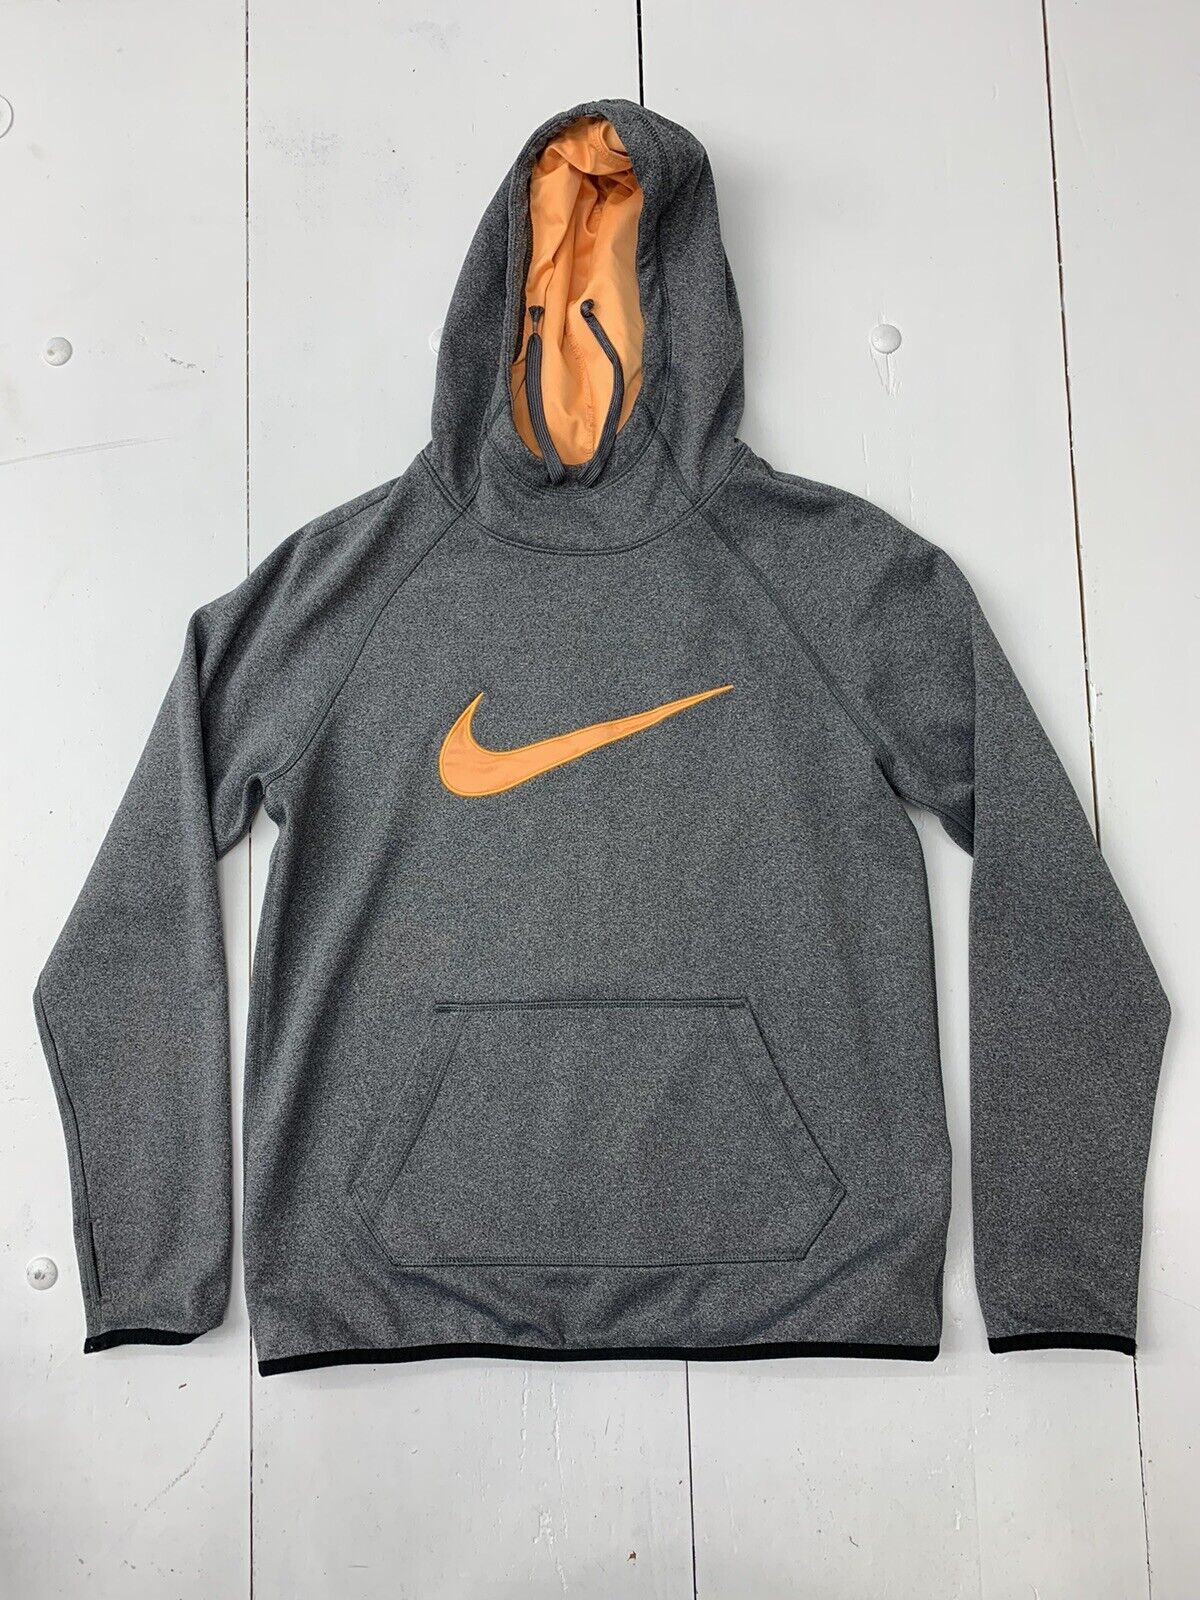 Nike Dri Fit Mens Grey Pullover Hoodie Size Small - beyond exchange